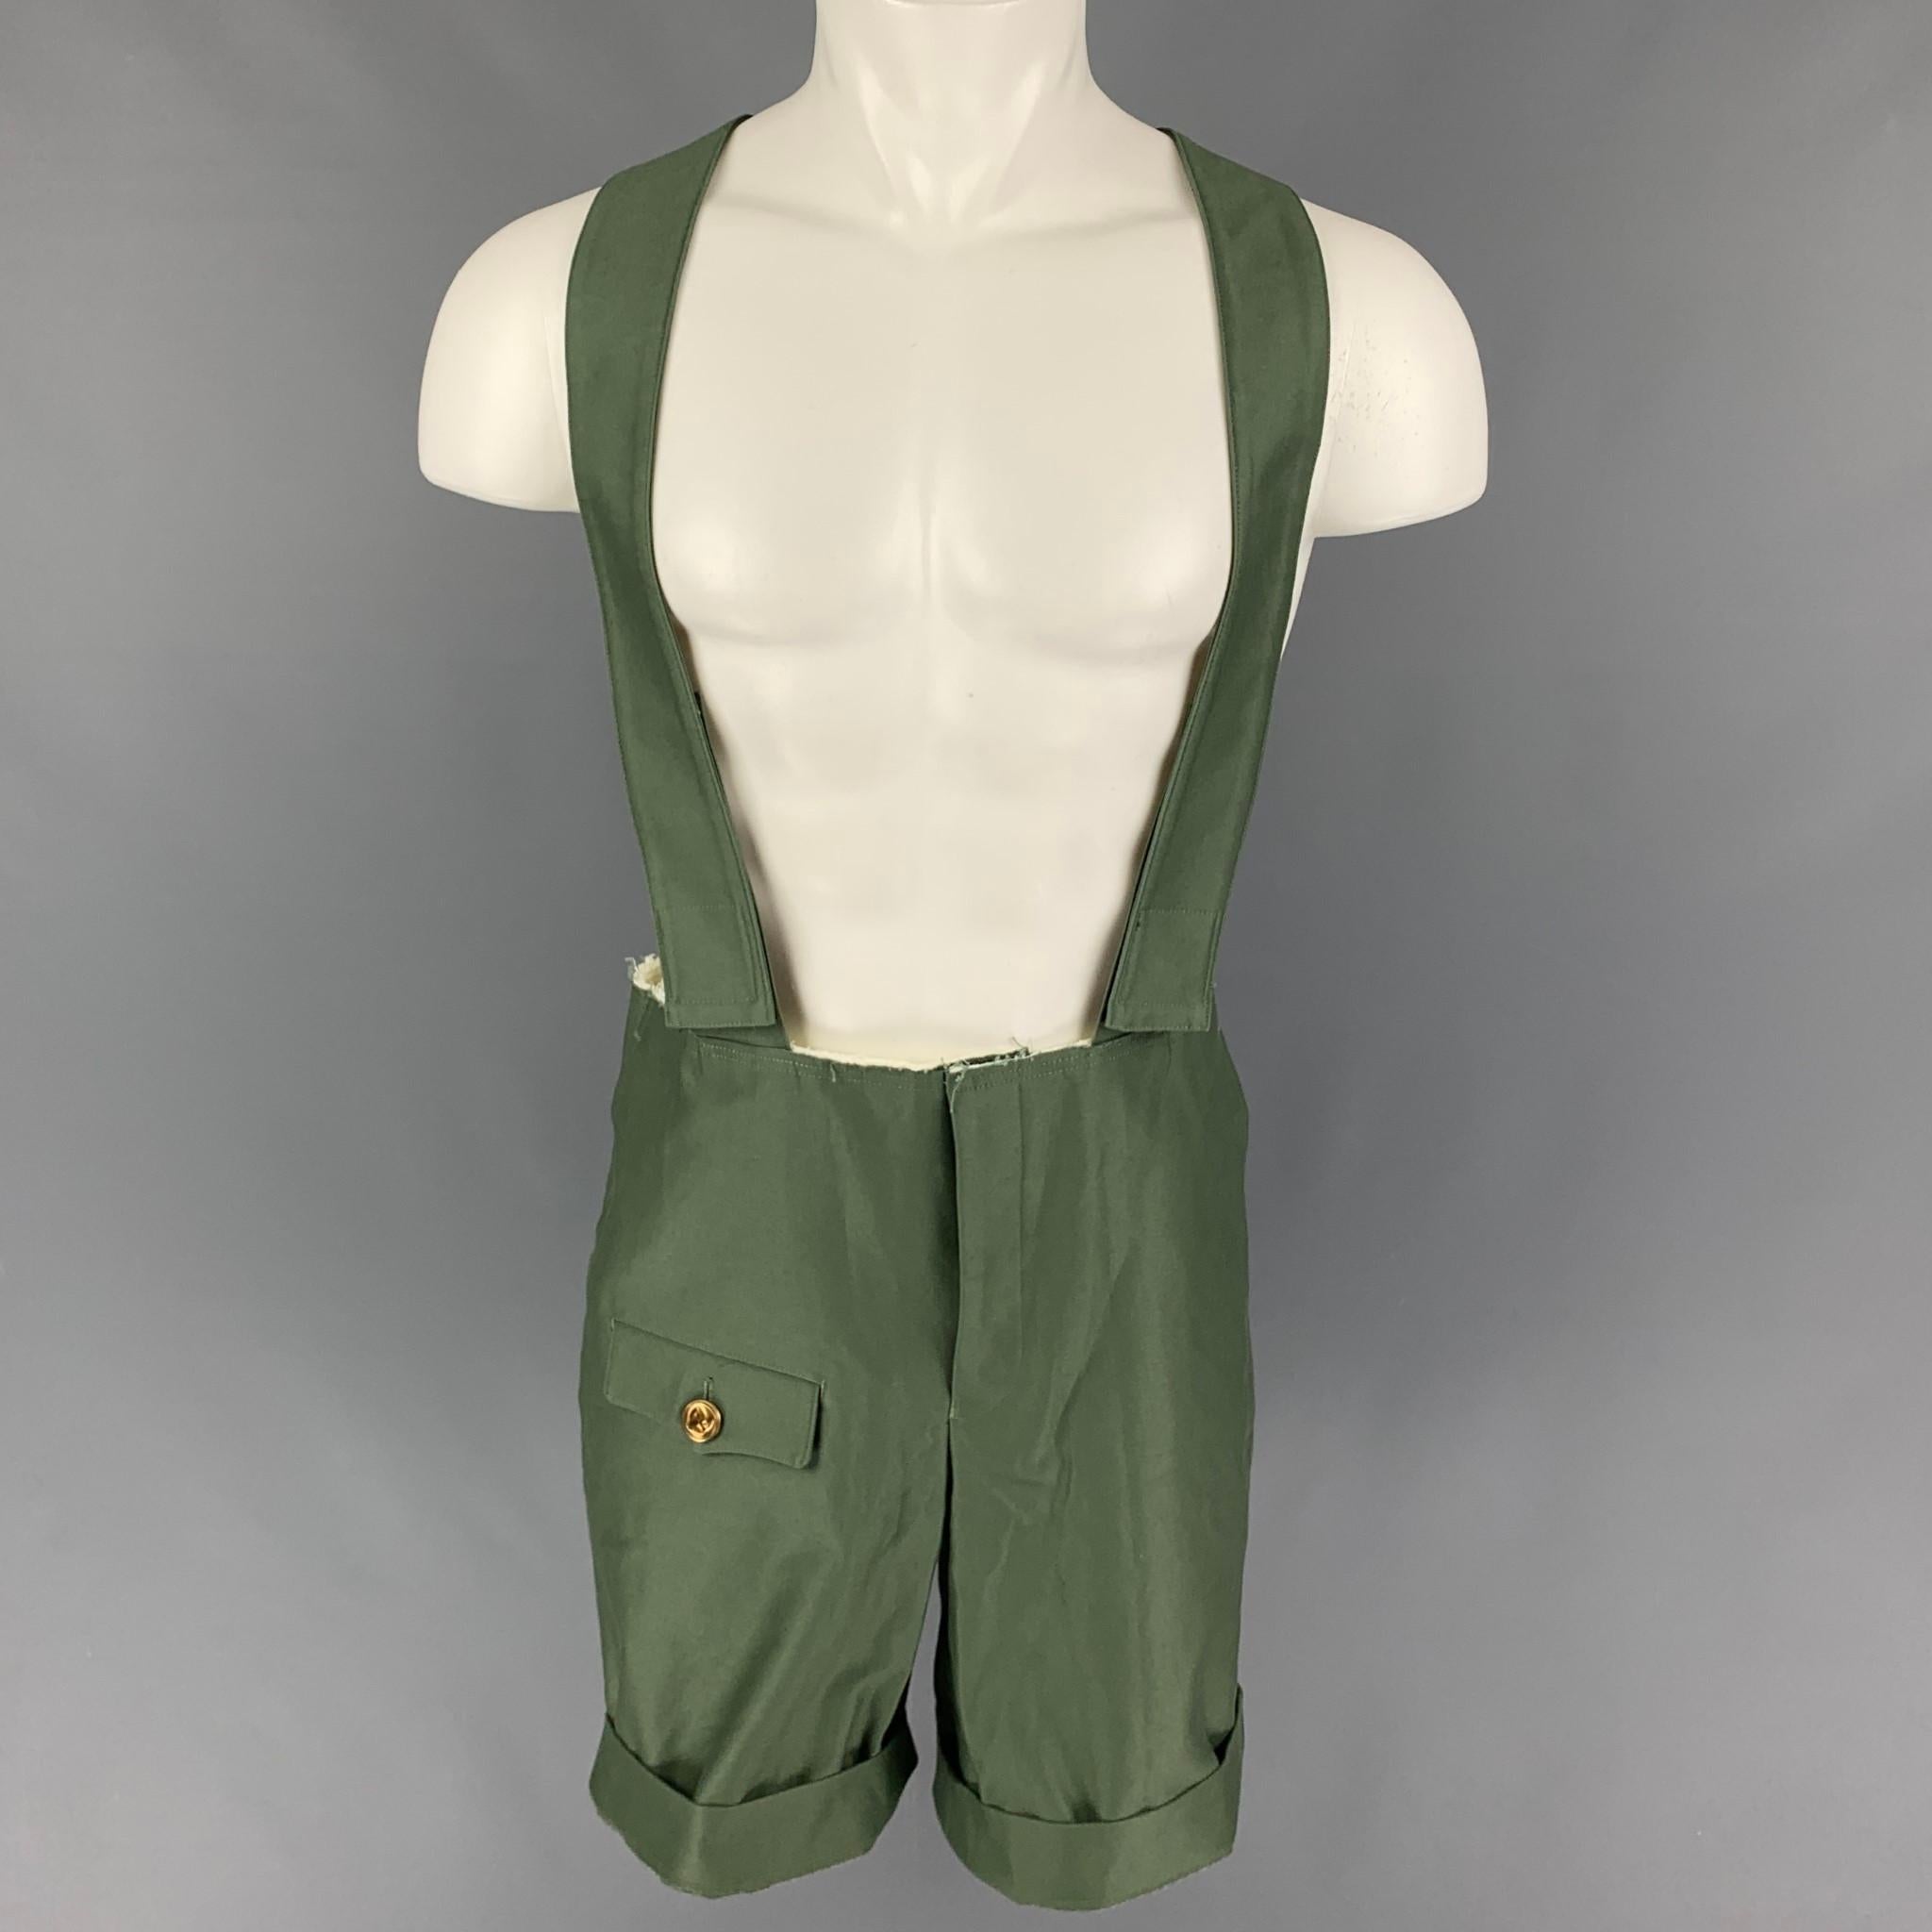 COMME des GARCONS HOMME PLUS overalls comes in a green cotton featuring adjustable suspenders, raw edge, gold tone button detail, and a zip fly closure. Made in Japan. 

Excellent Pre-Owned Condition.
Marked: S / AD2014

Measurements:

Waist: 36